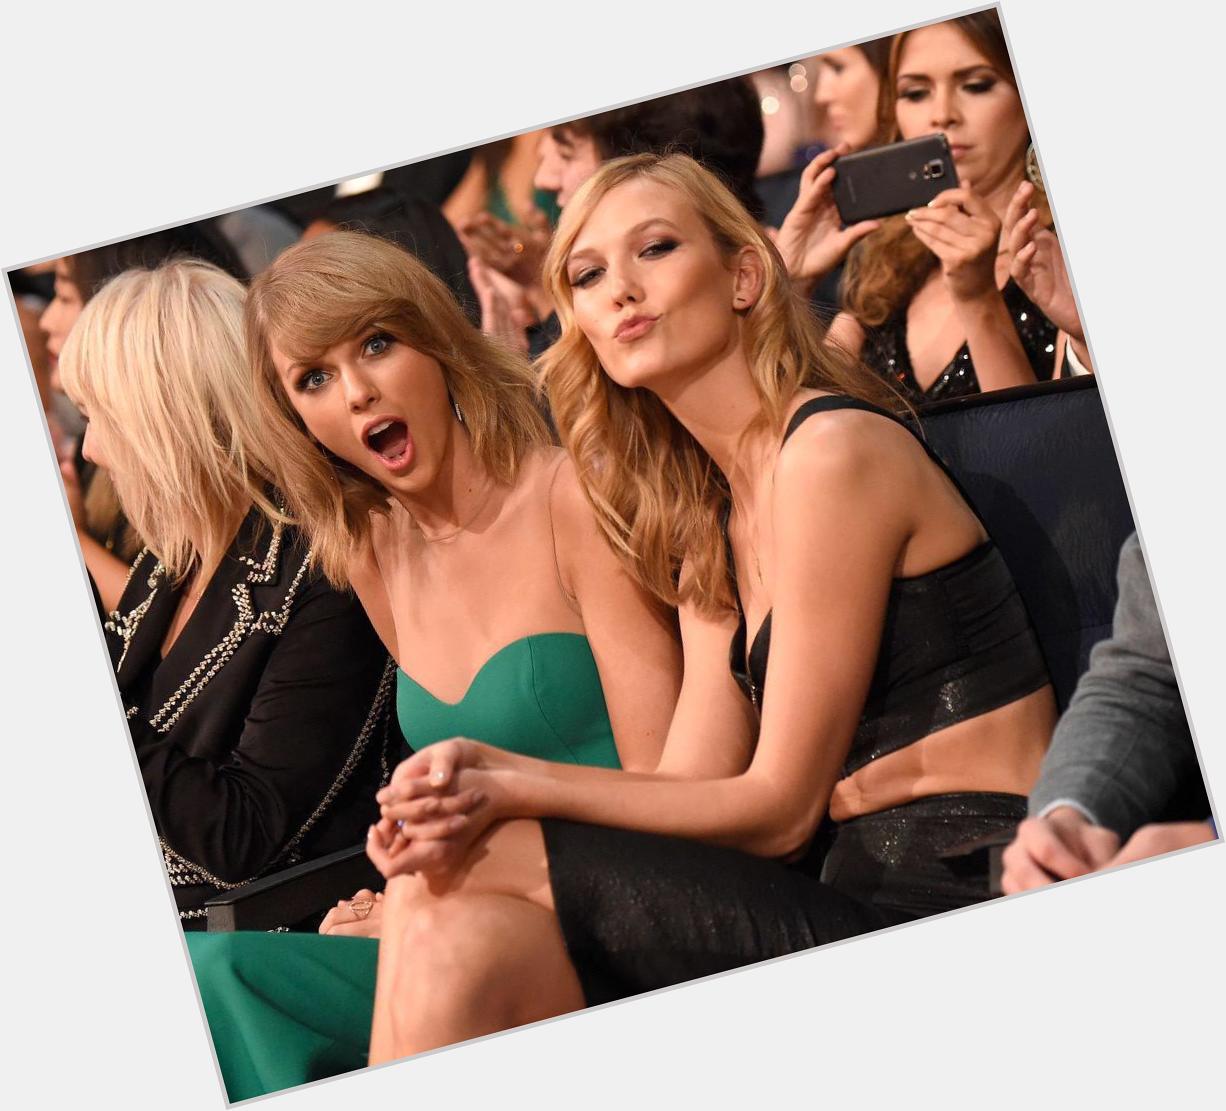   Happy Birthday to Karlie Kloss!
I love you Taylor!
Taylor and Karlie! 